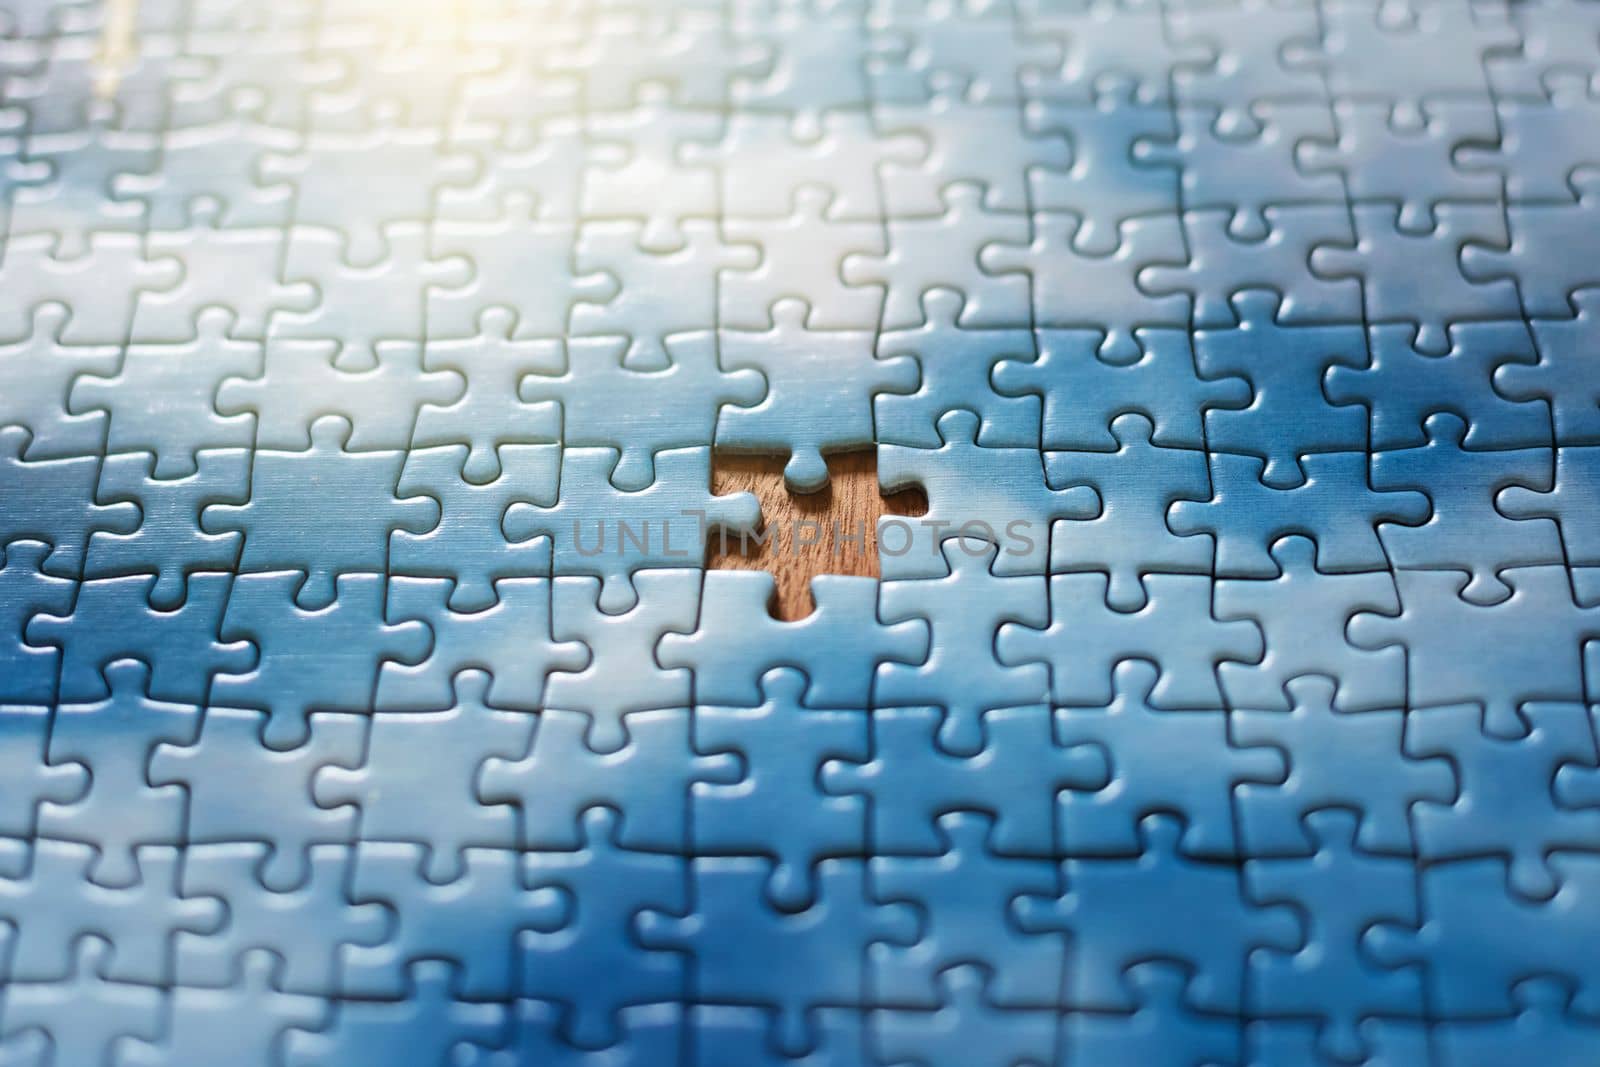 The last piece of jigsaw puzzle concept for solutions and completion by Len44ik